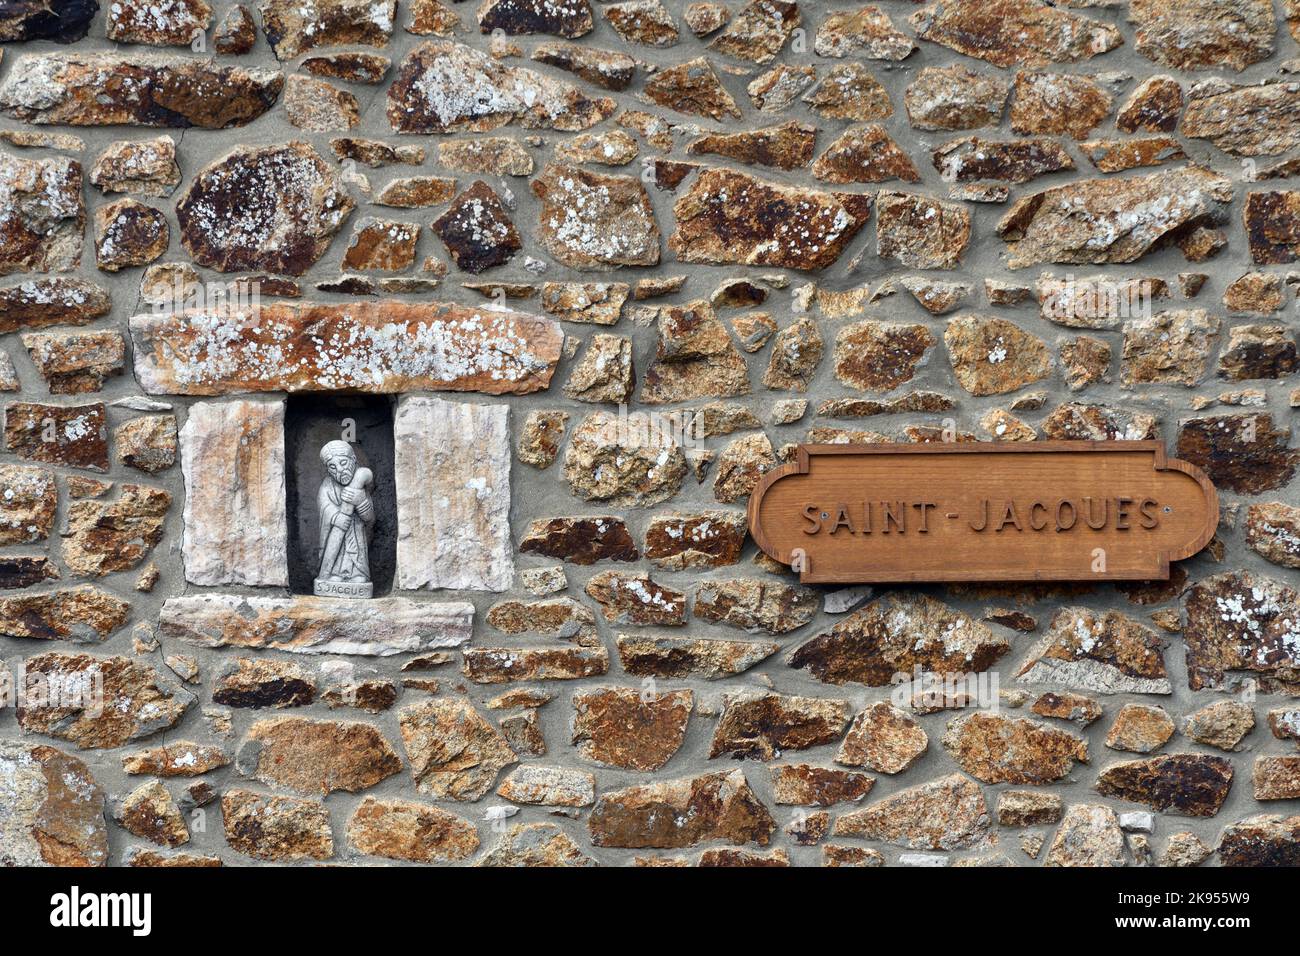 Niche with saint statue in a natural stone wall and wooden sign 'Saint-Jacques', France, Brittany, Saint-Alban Stock Photo